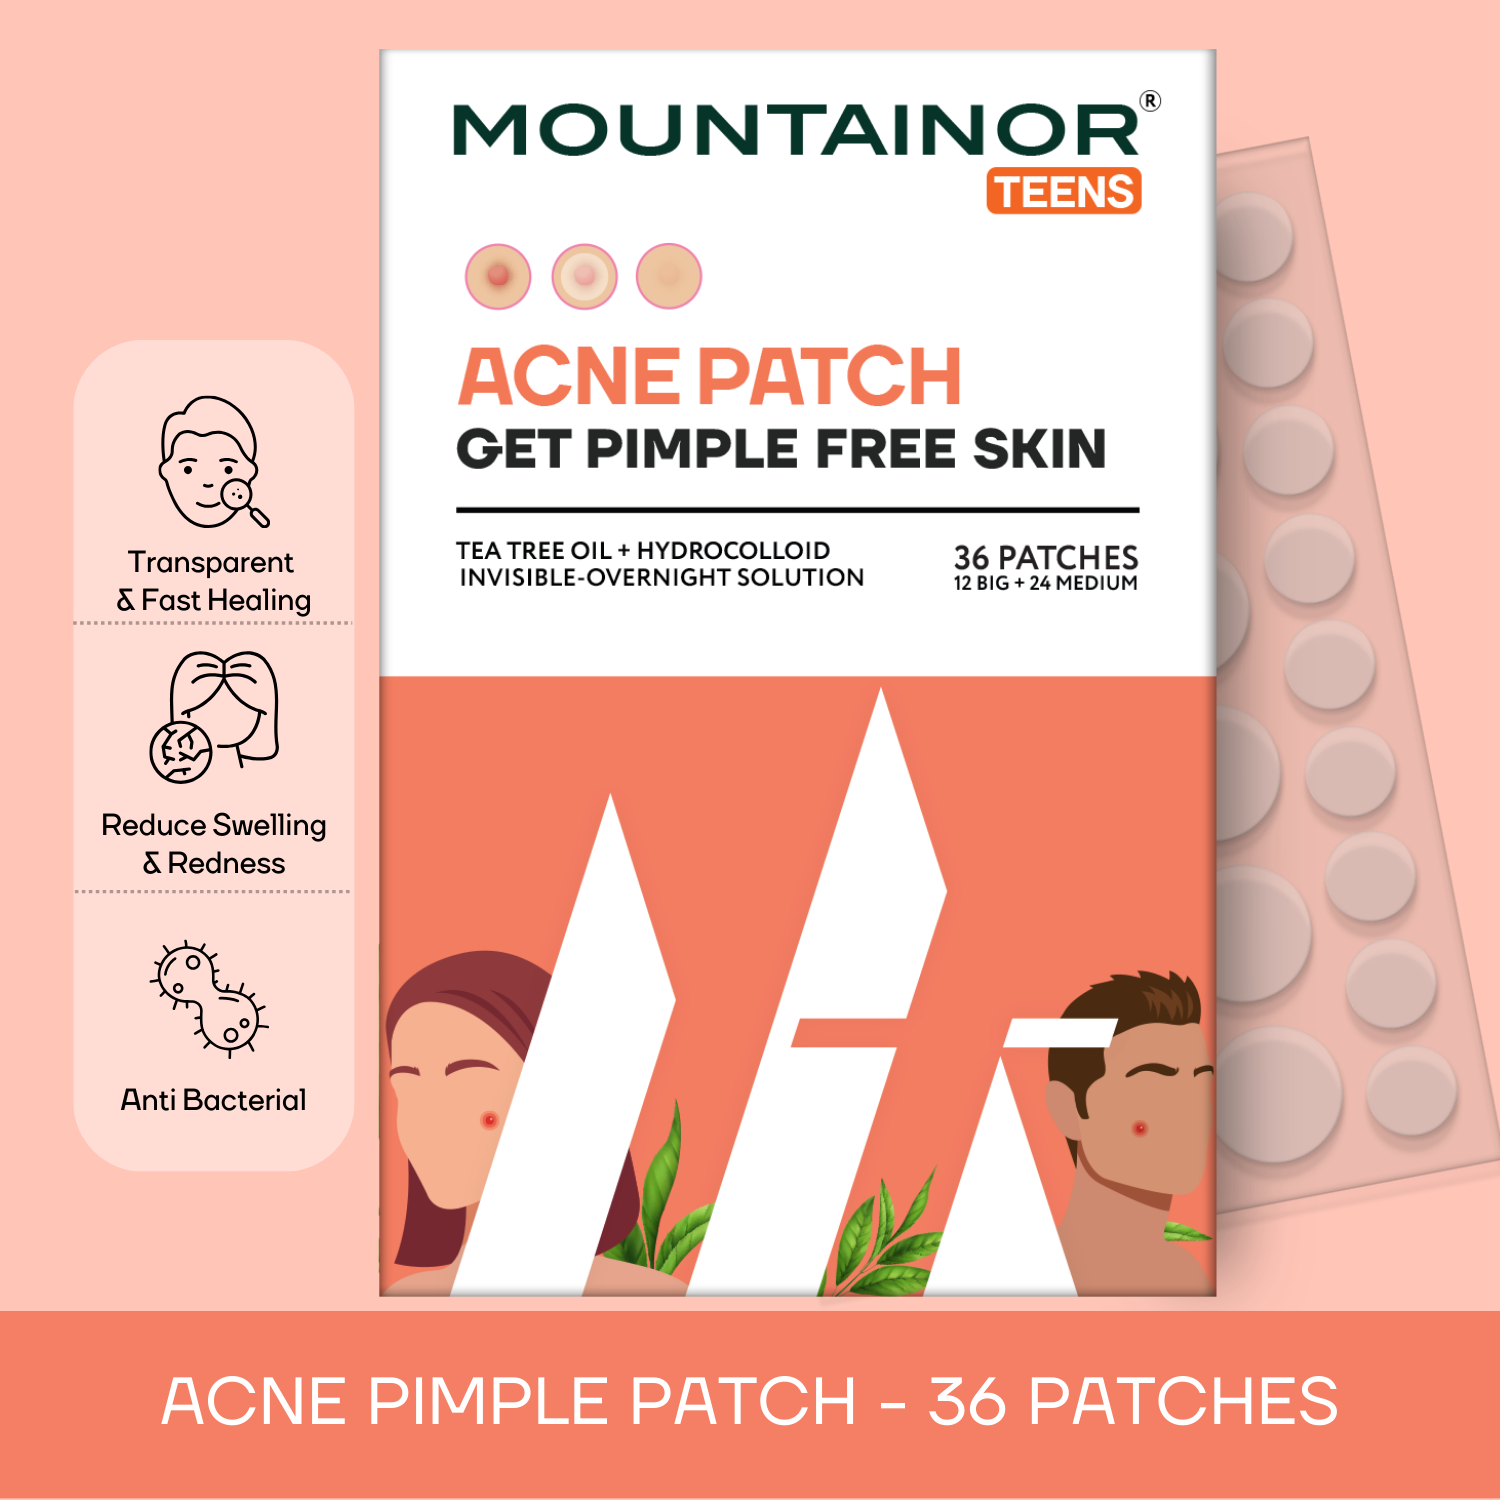 Acne Pimple Patch for Teens 👦🏻👩🏻 - Pack Of 2 Hydrocolloid Patches for Clear, Blemish-Free Skin